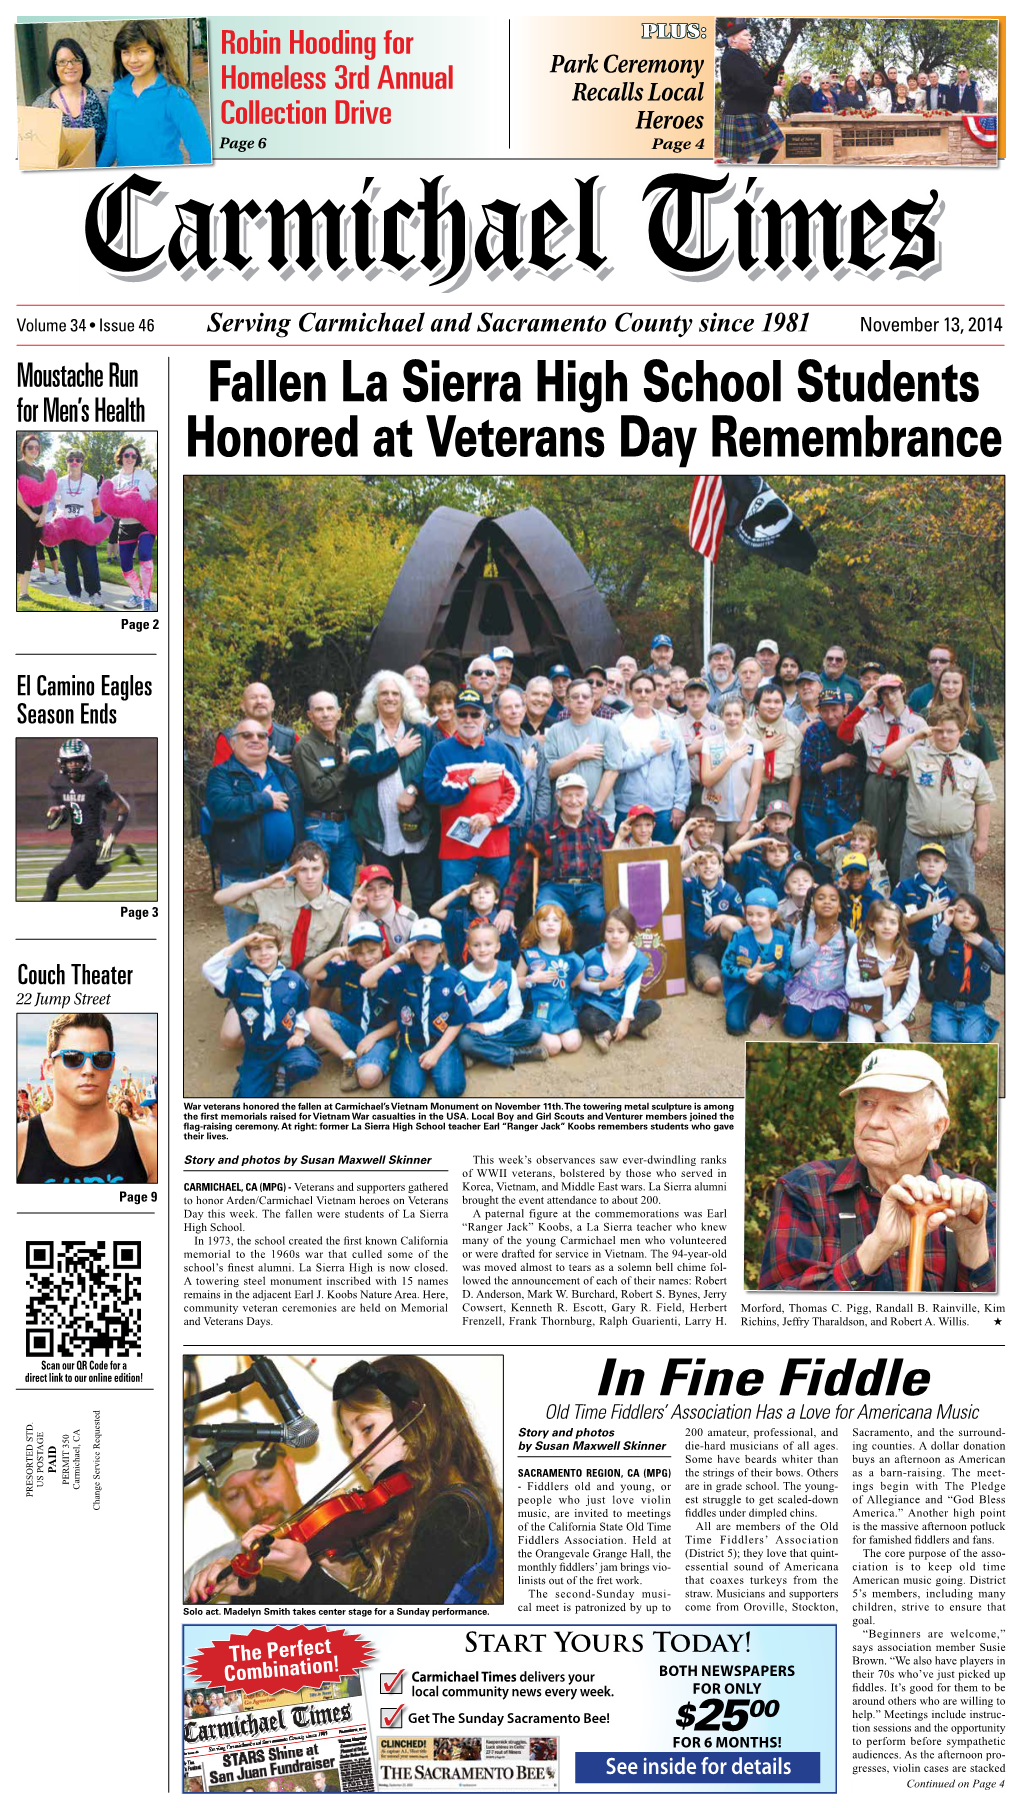 Fallen La Sierra High School Students Honored at Veterans Day Remembrance